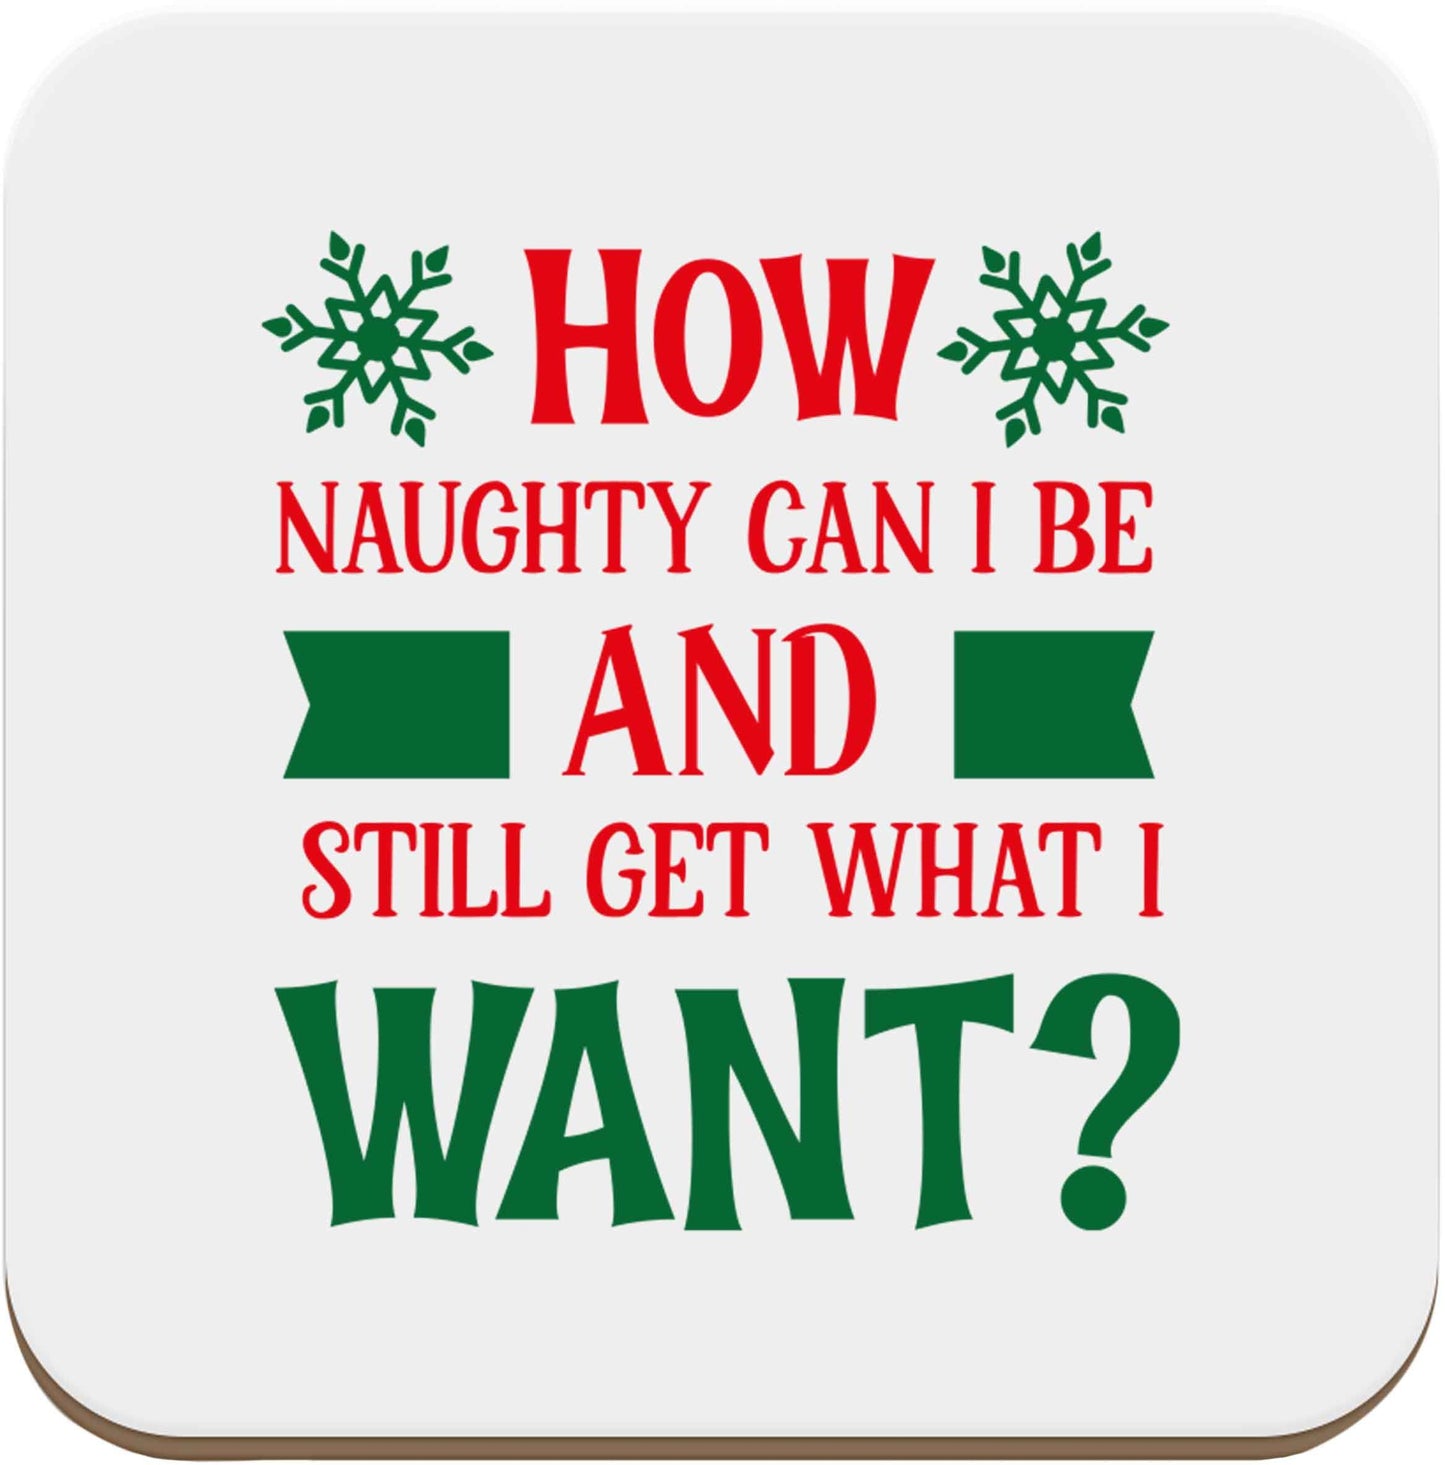 How naughty can I be and still get what I want? set of four coasters